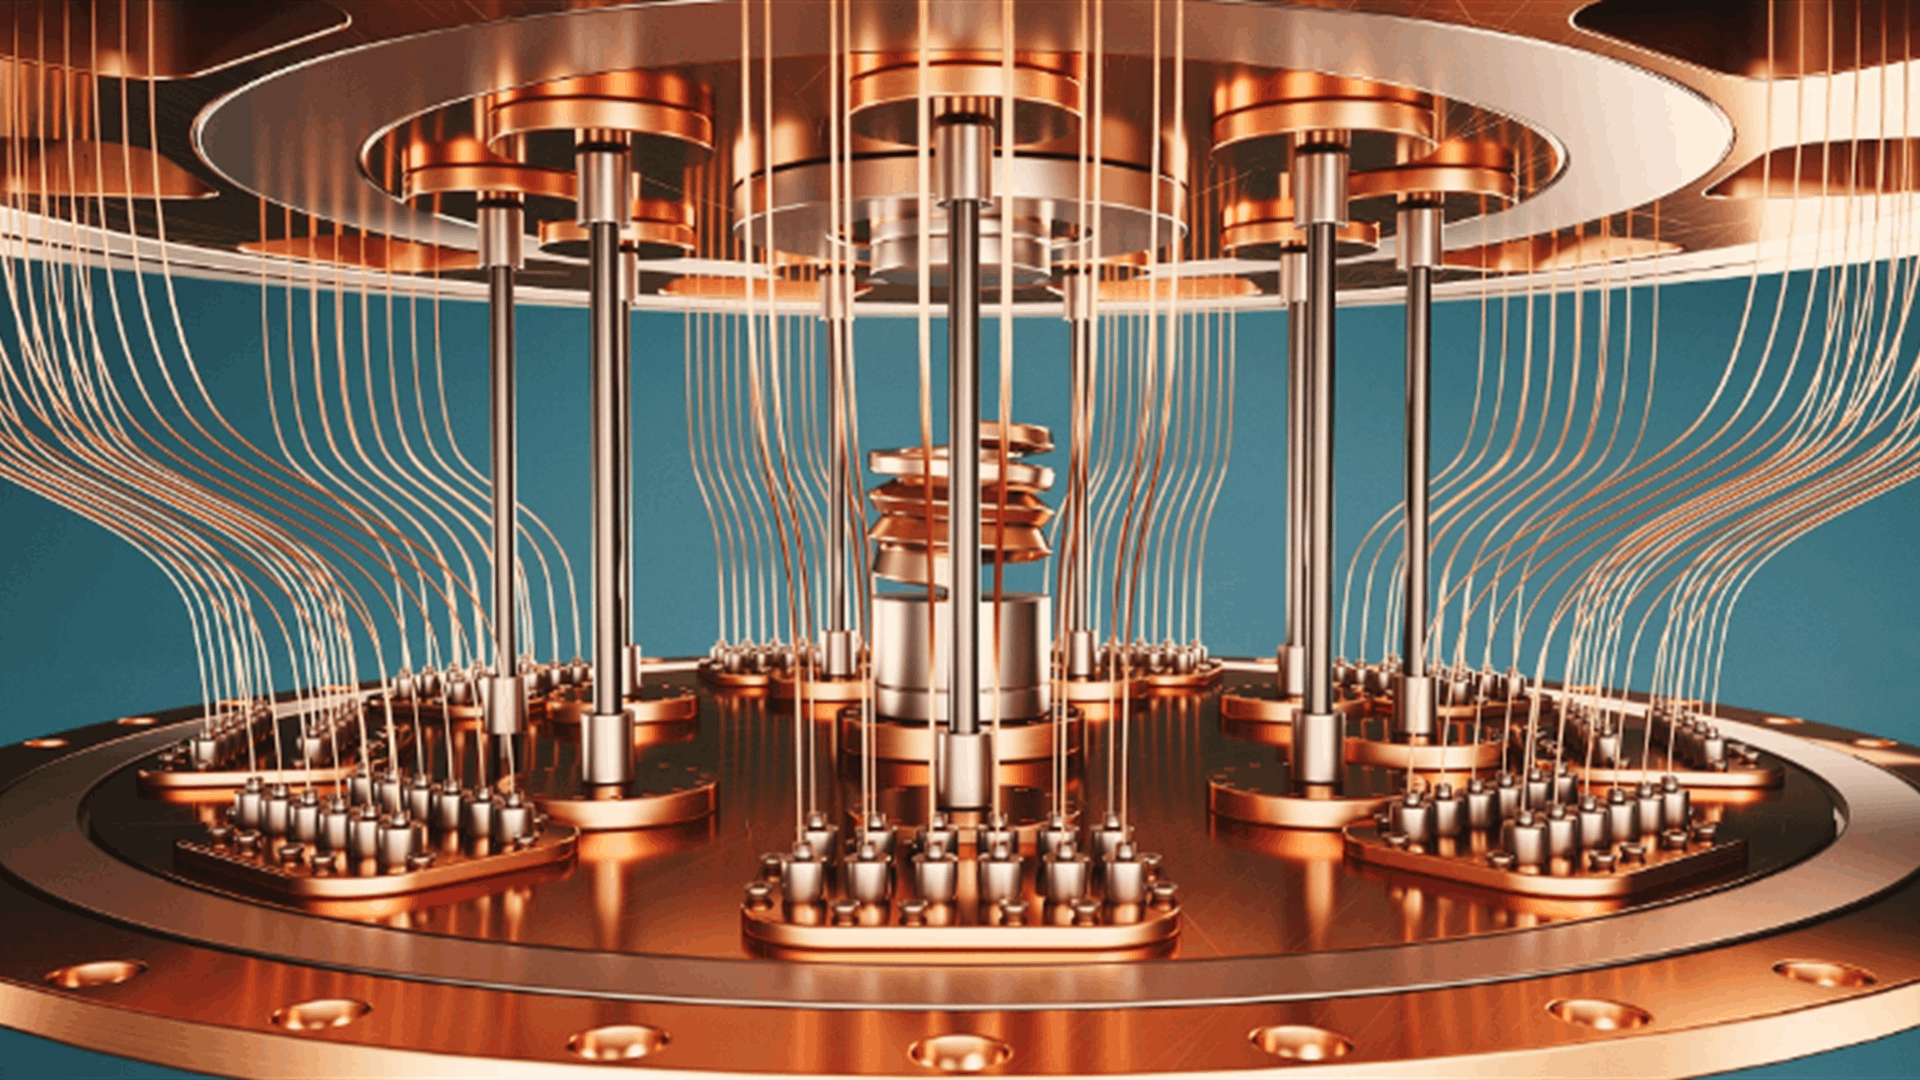 Quantum Machines continues to grow in spite of economic uncertainty